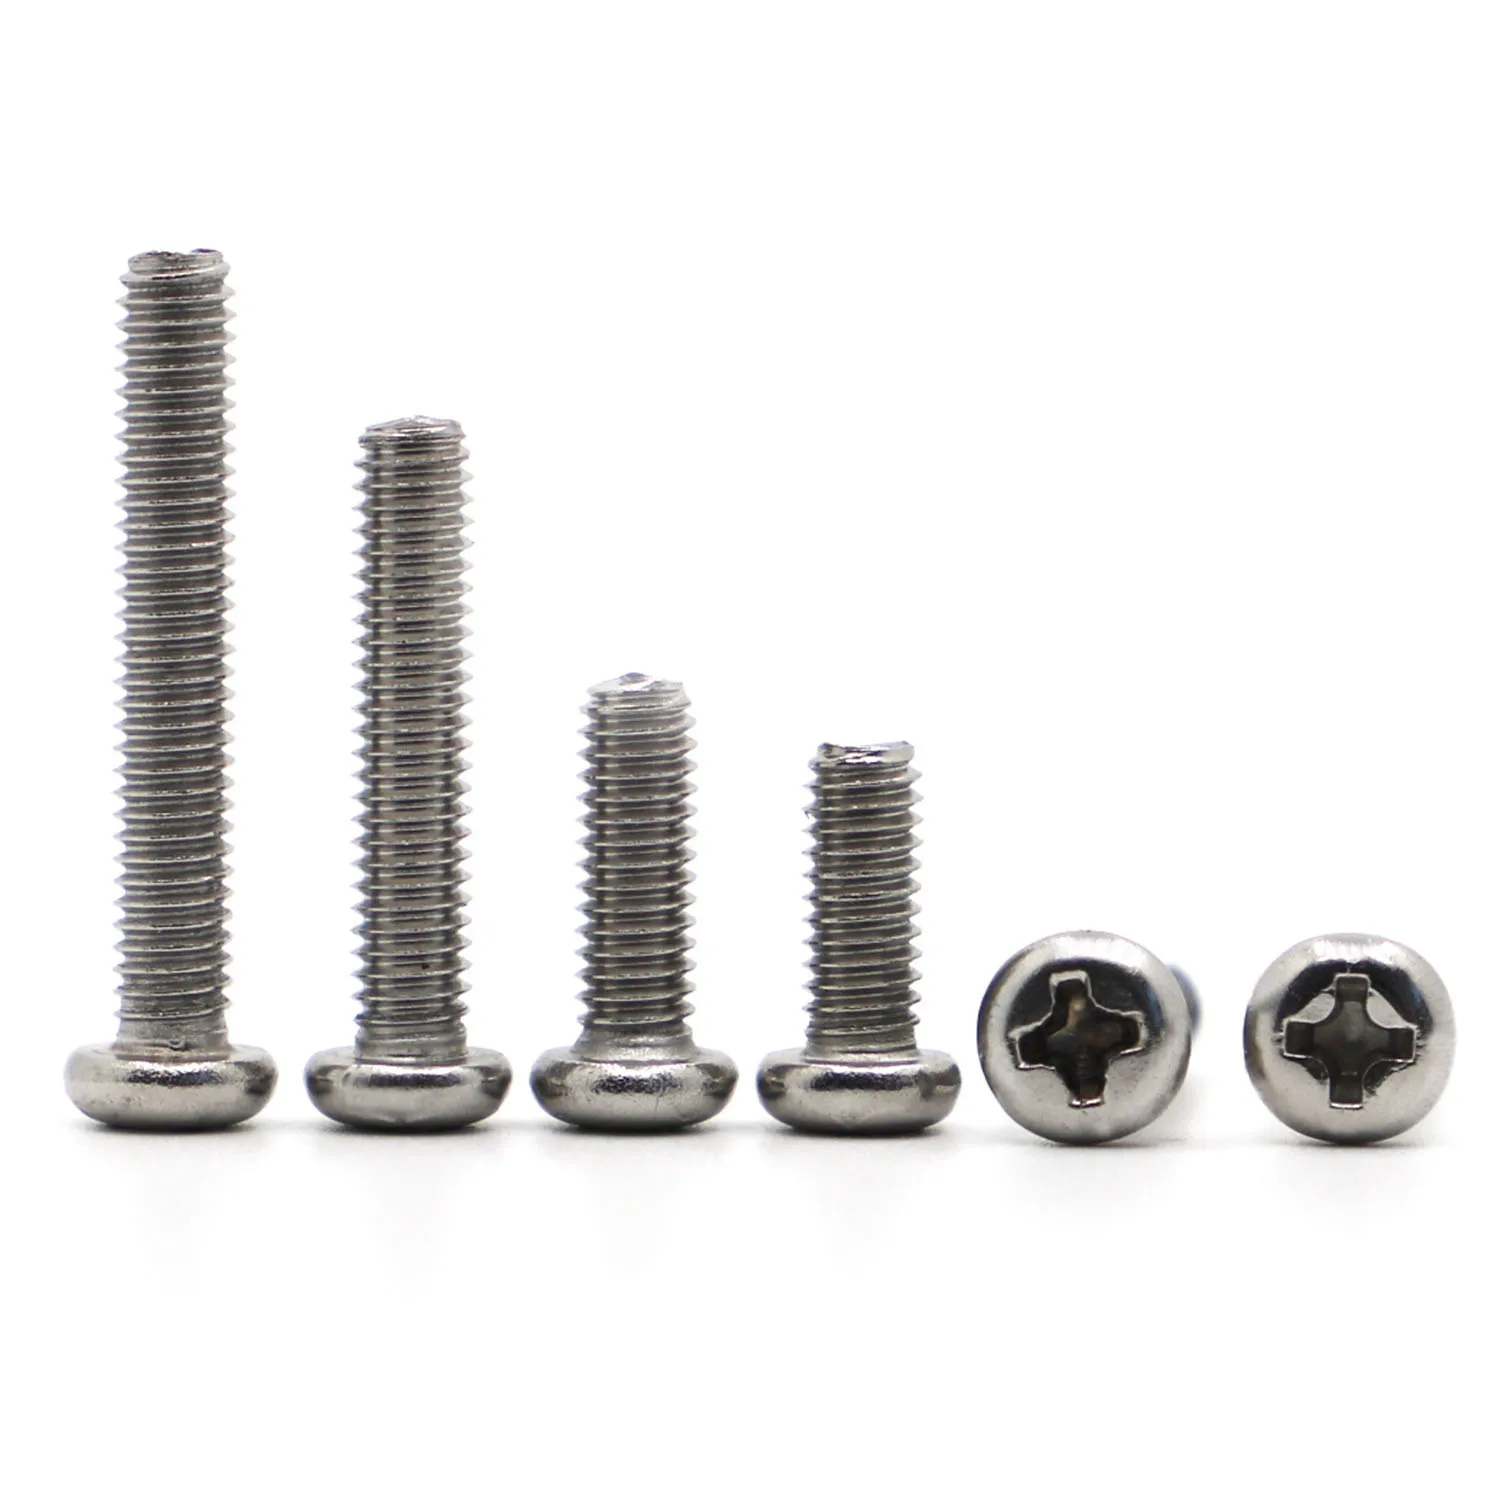 M1 M1.2 M1.4 M1.6 M2 M2.5 M3 M4 M5 M6 M8 GB818 DIN7985 Stainless Steel Cross Recessed Pan Head Screw Phillips TV Computer Bolts